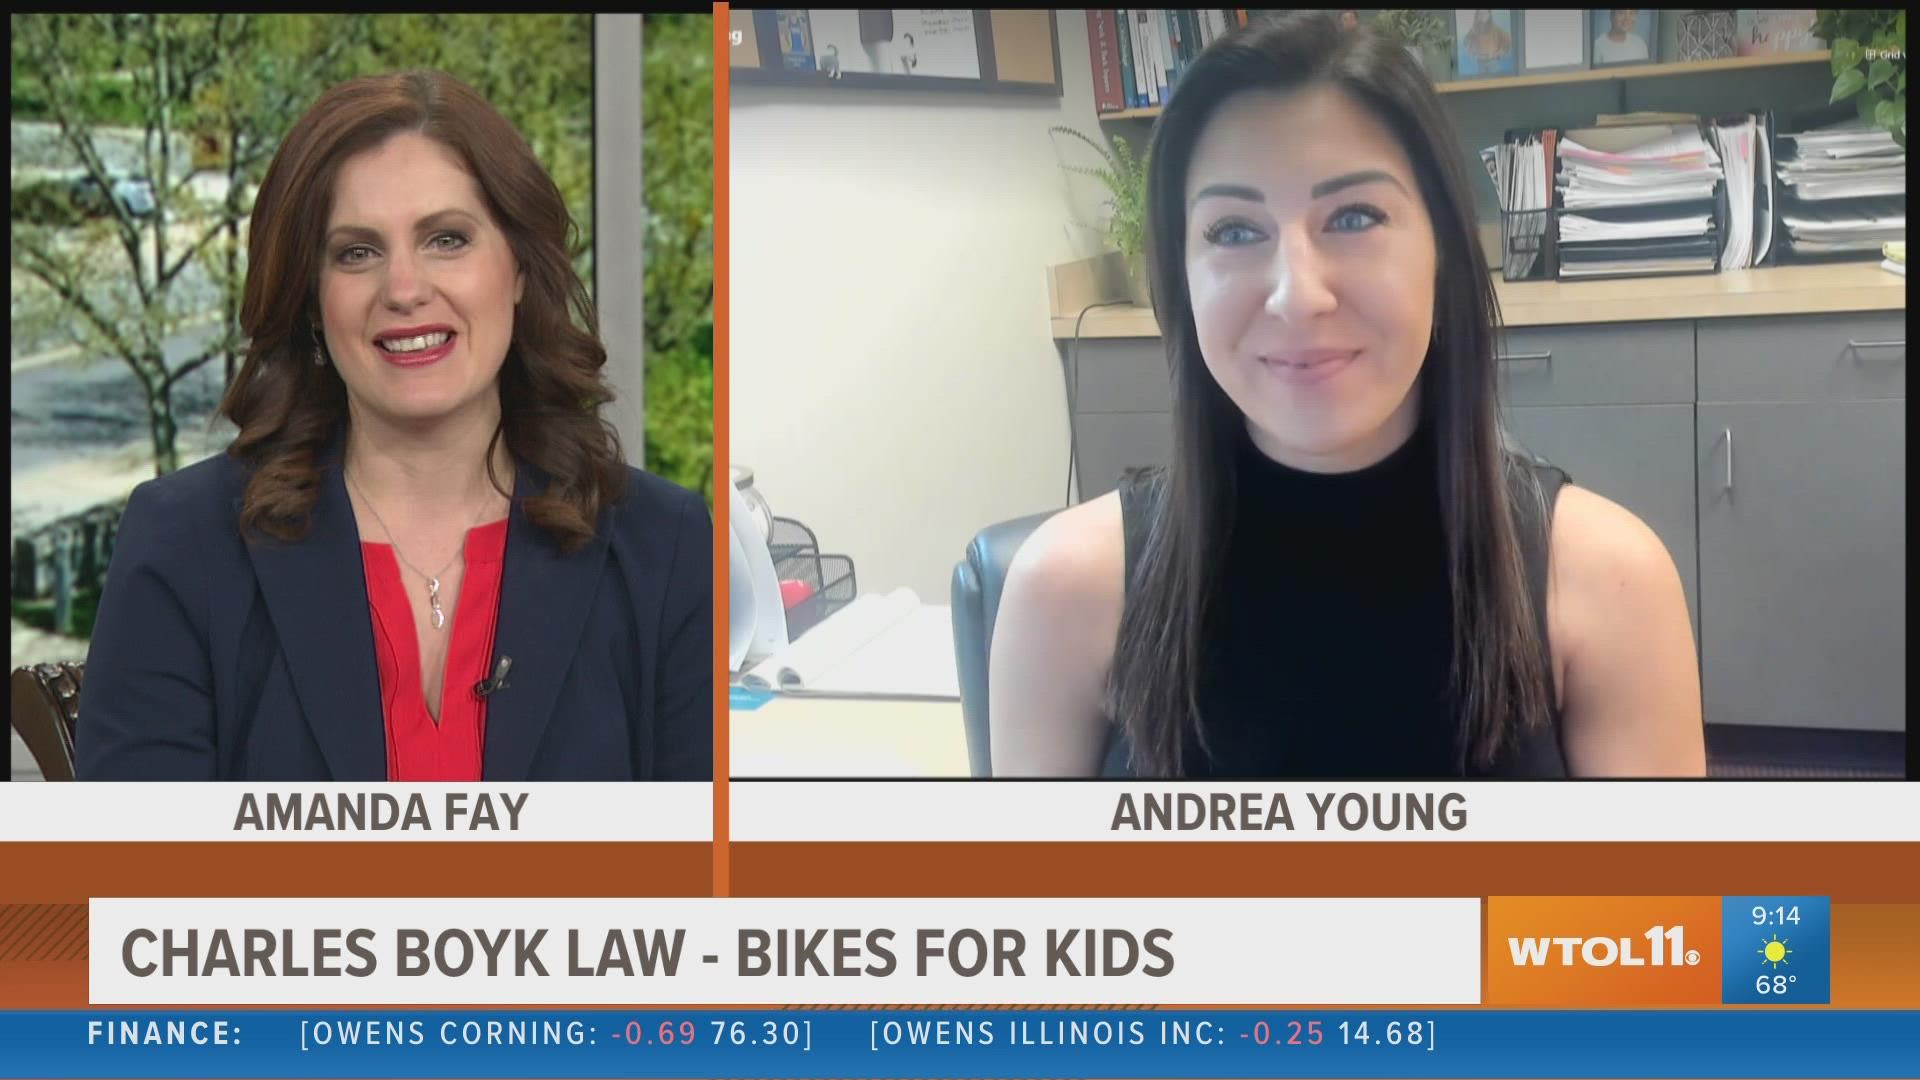 Andrea Young talks about Charles Boyk Law's Bikes for Kids.